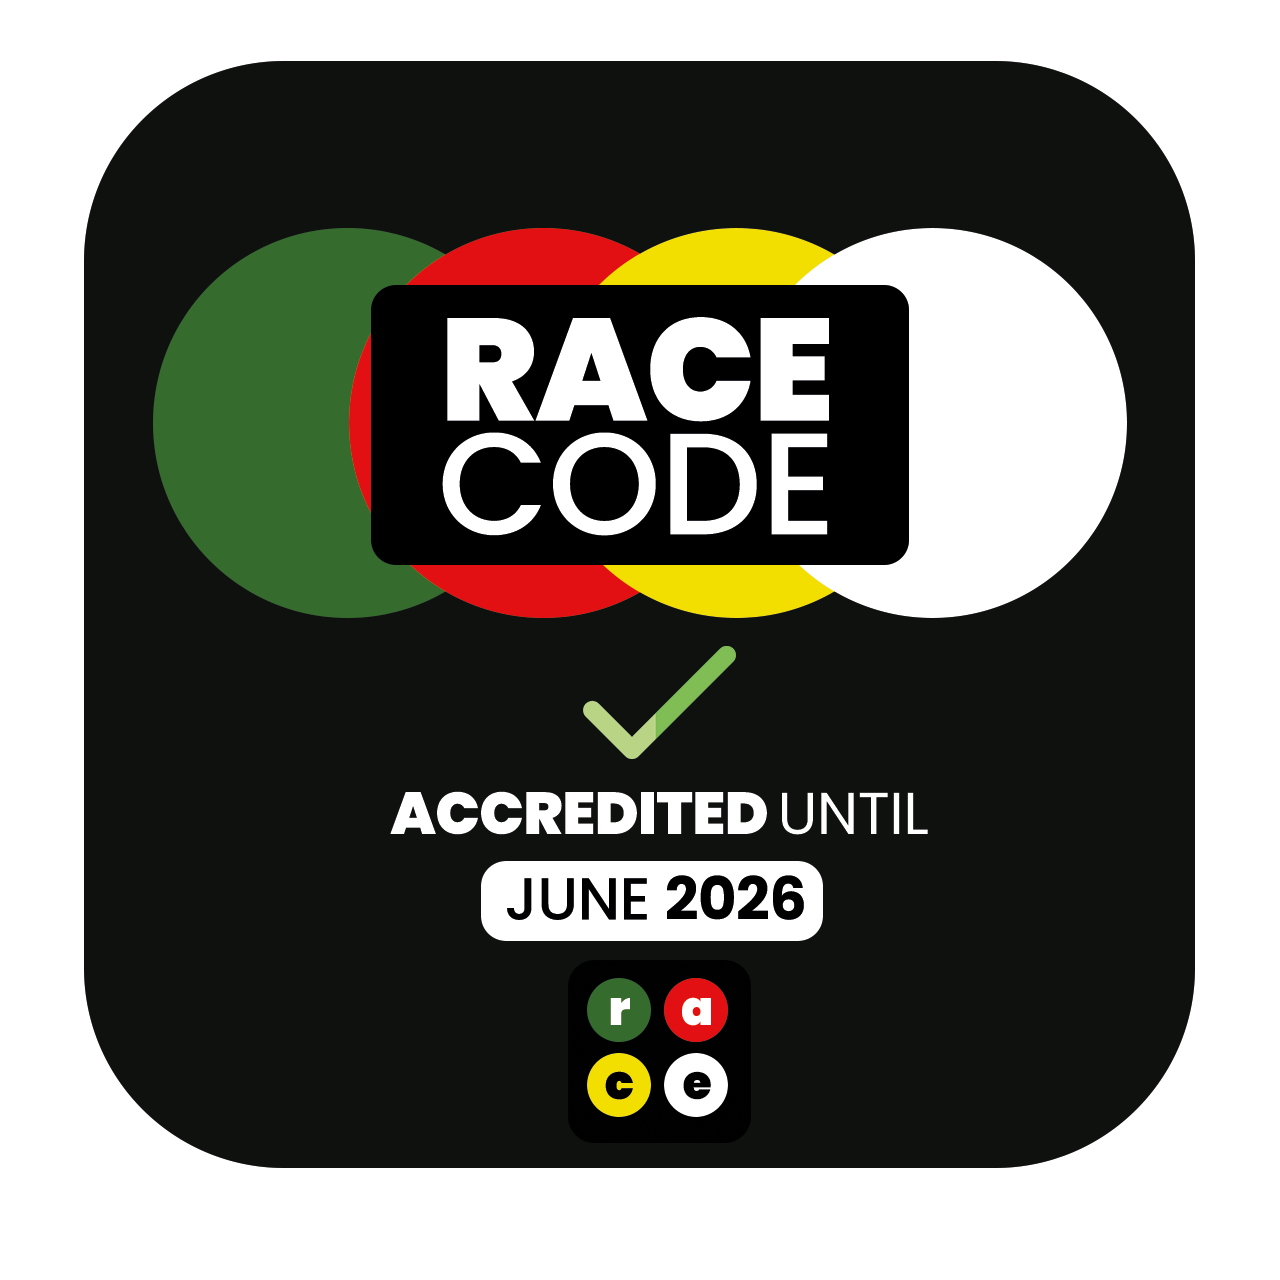 Race code accredited until June 2026